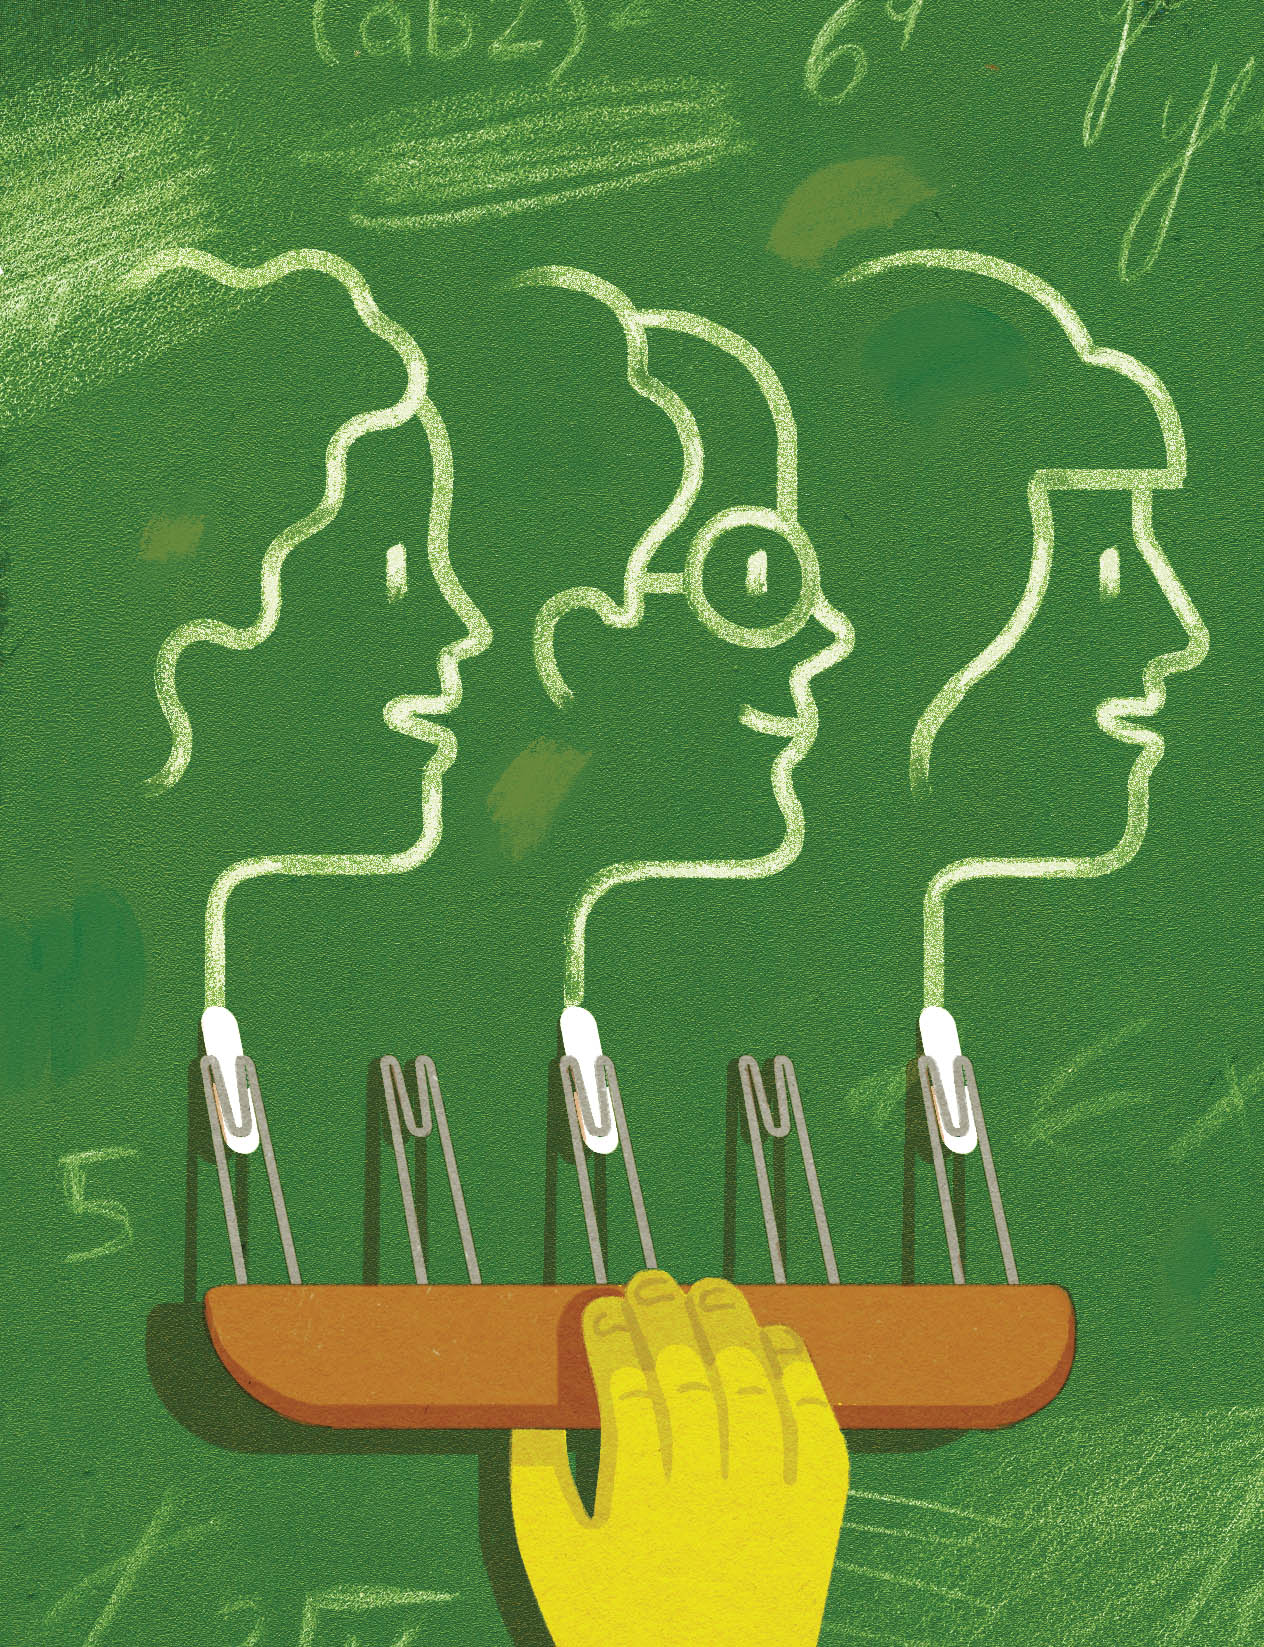 Illustration of a chalkboard drawing featuring the facial profile of three people.